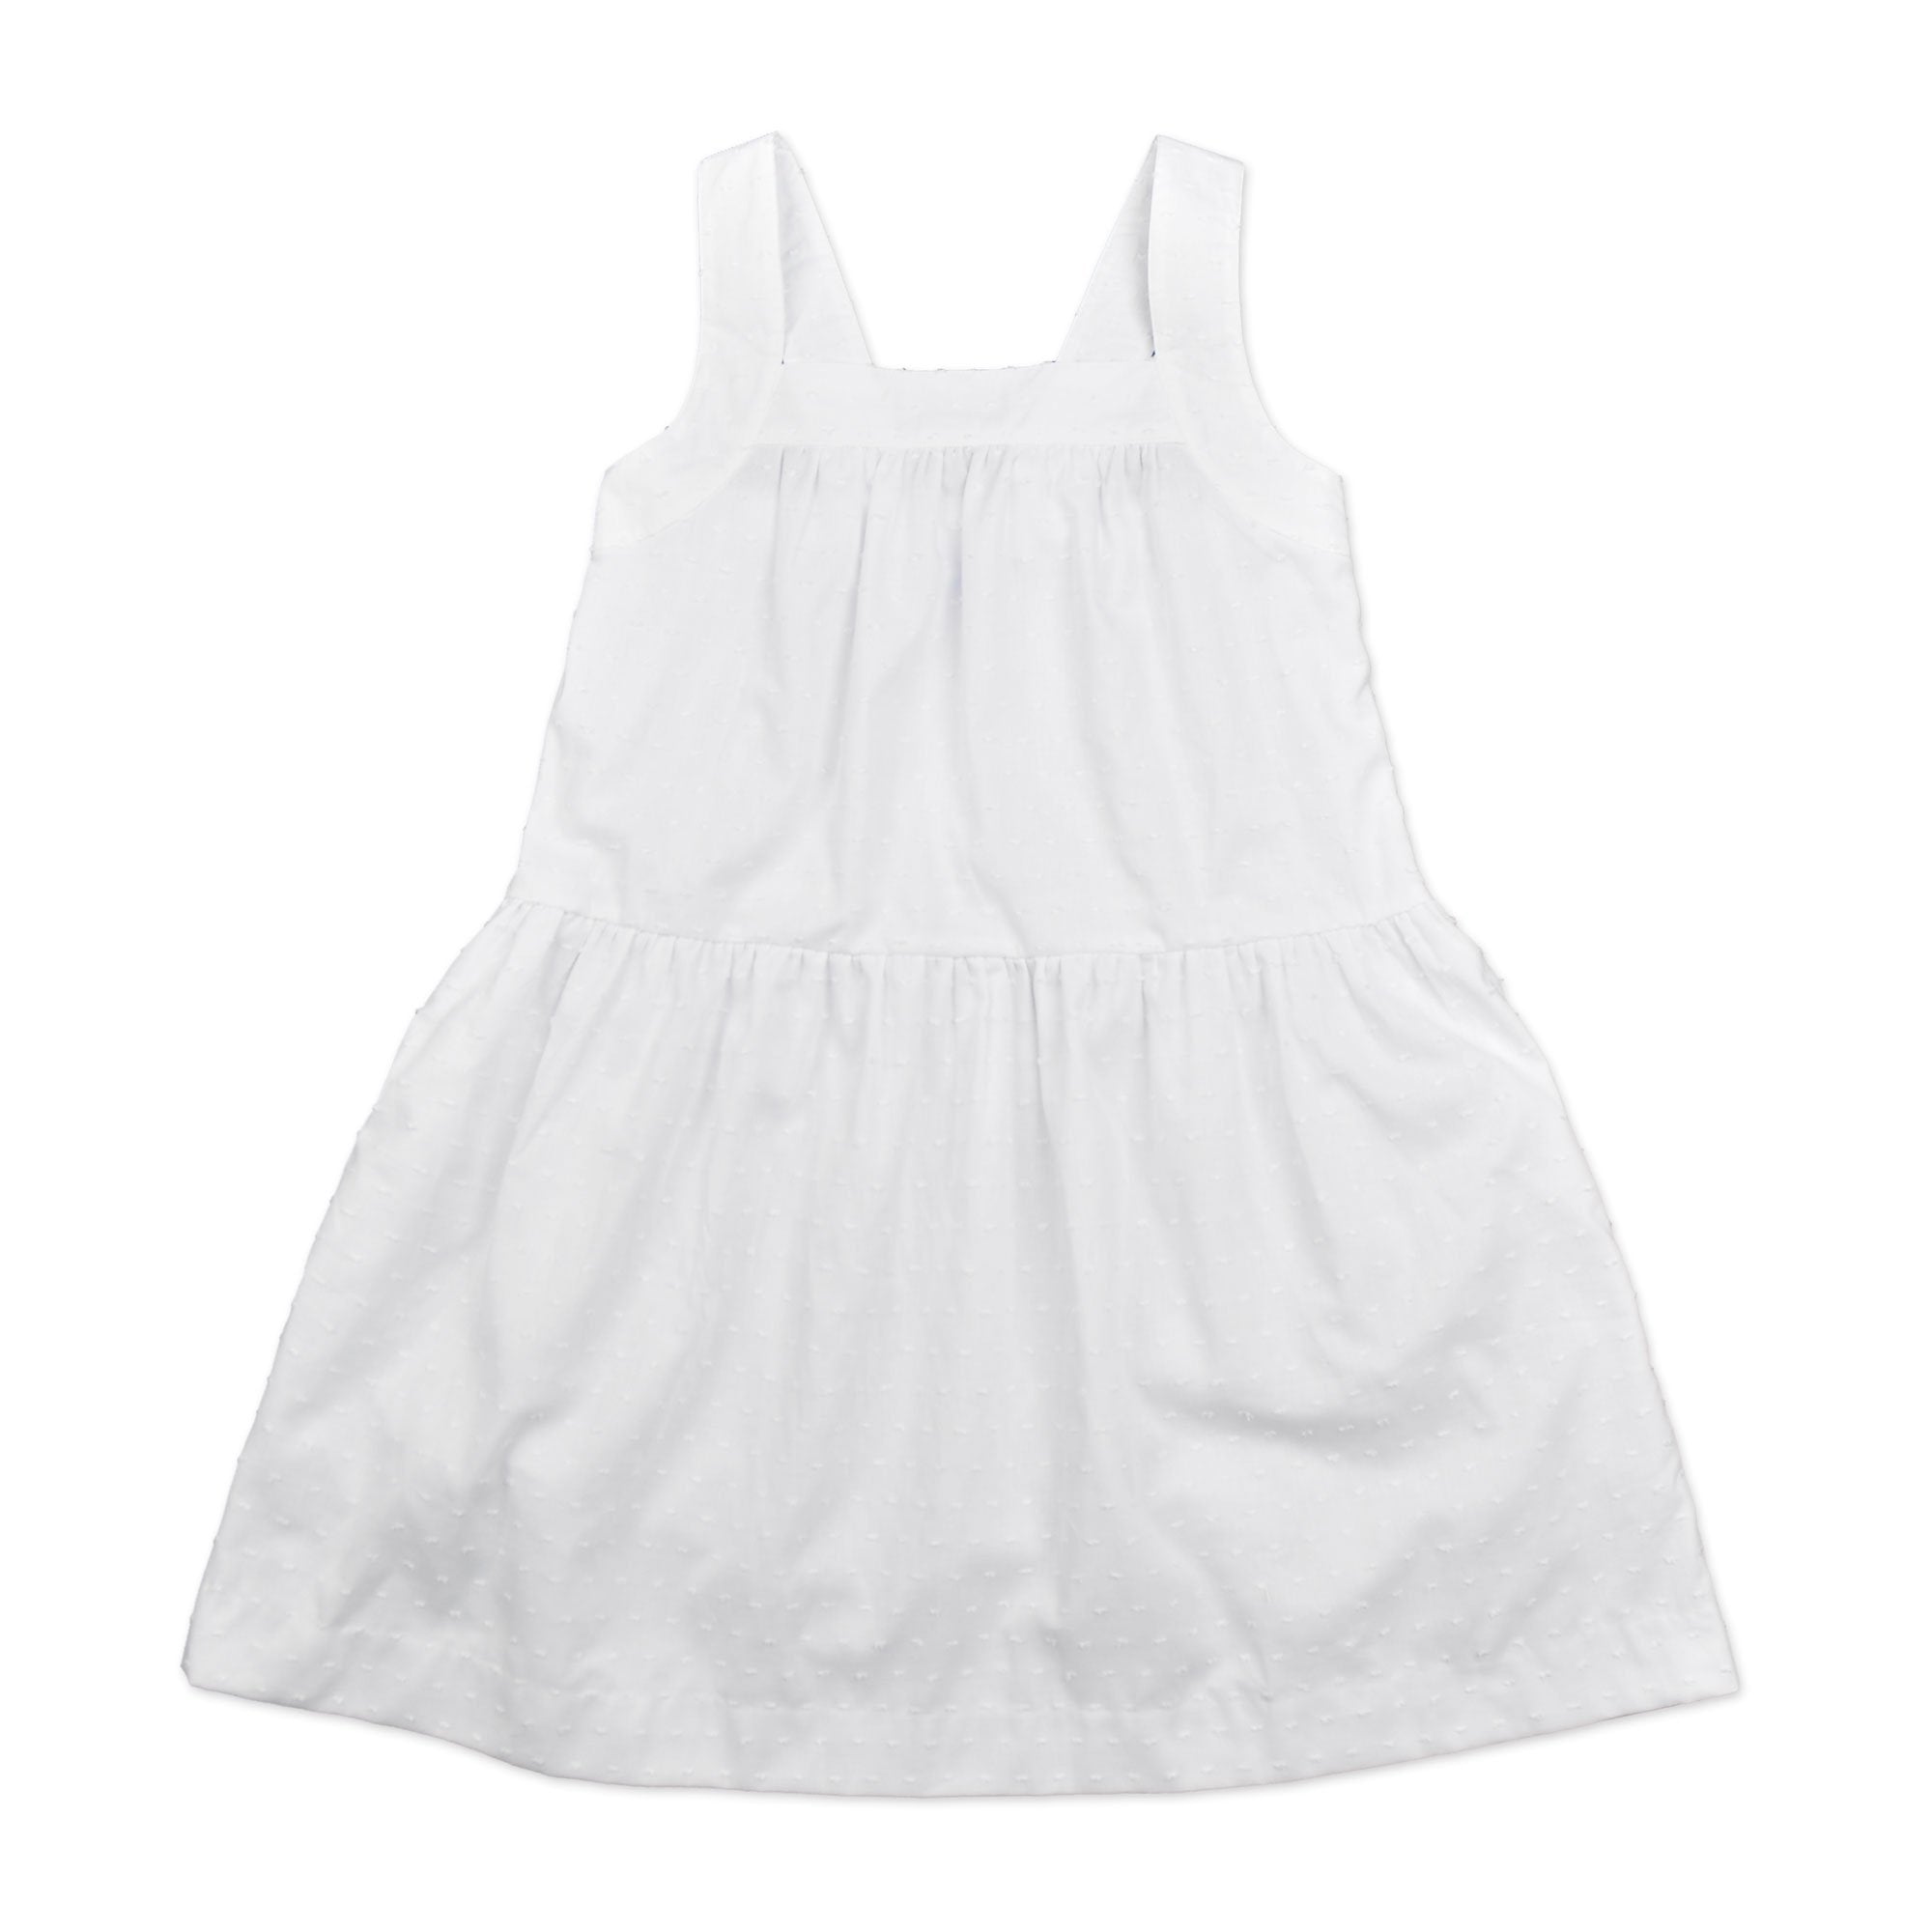 Camilla Dress In White Swiss Dot Cotton - Cou Cou Baby